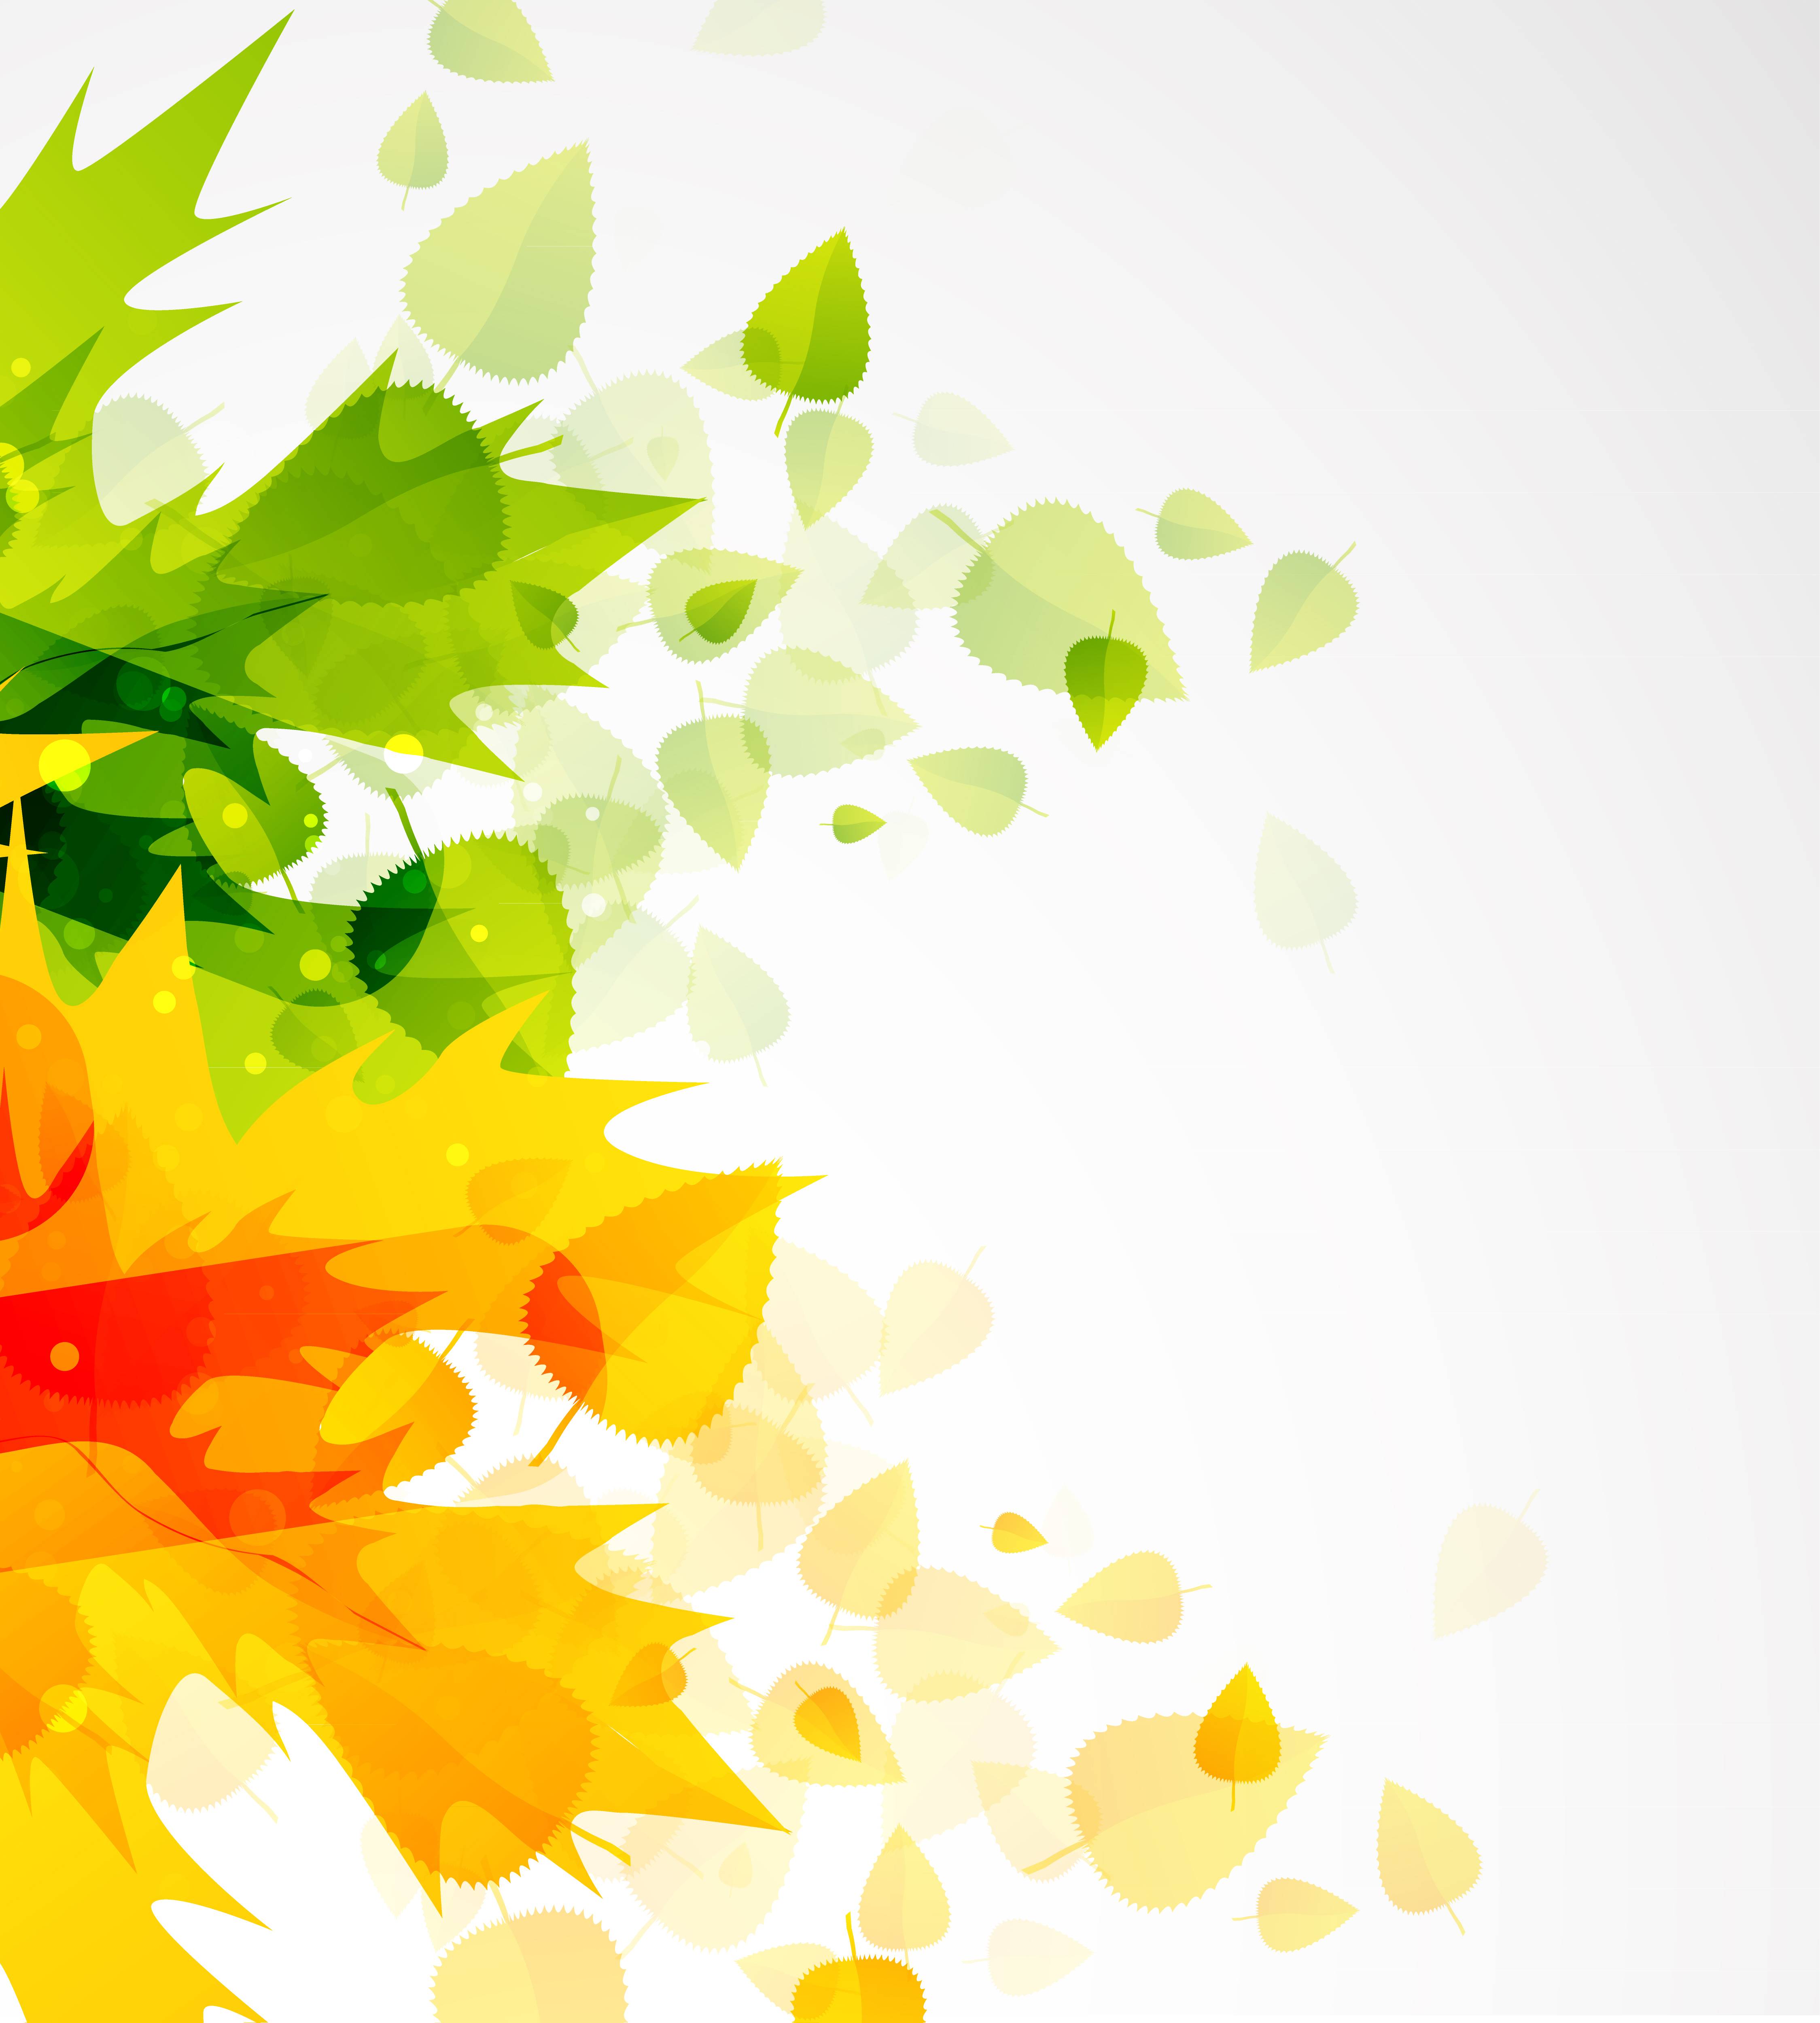 Beautiful autumn leaf background 01 vector Free Vector / 4Vector